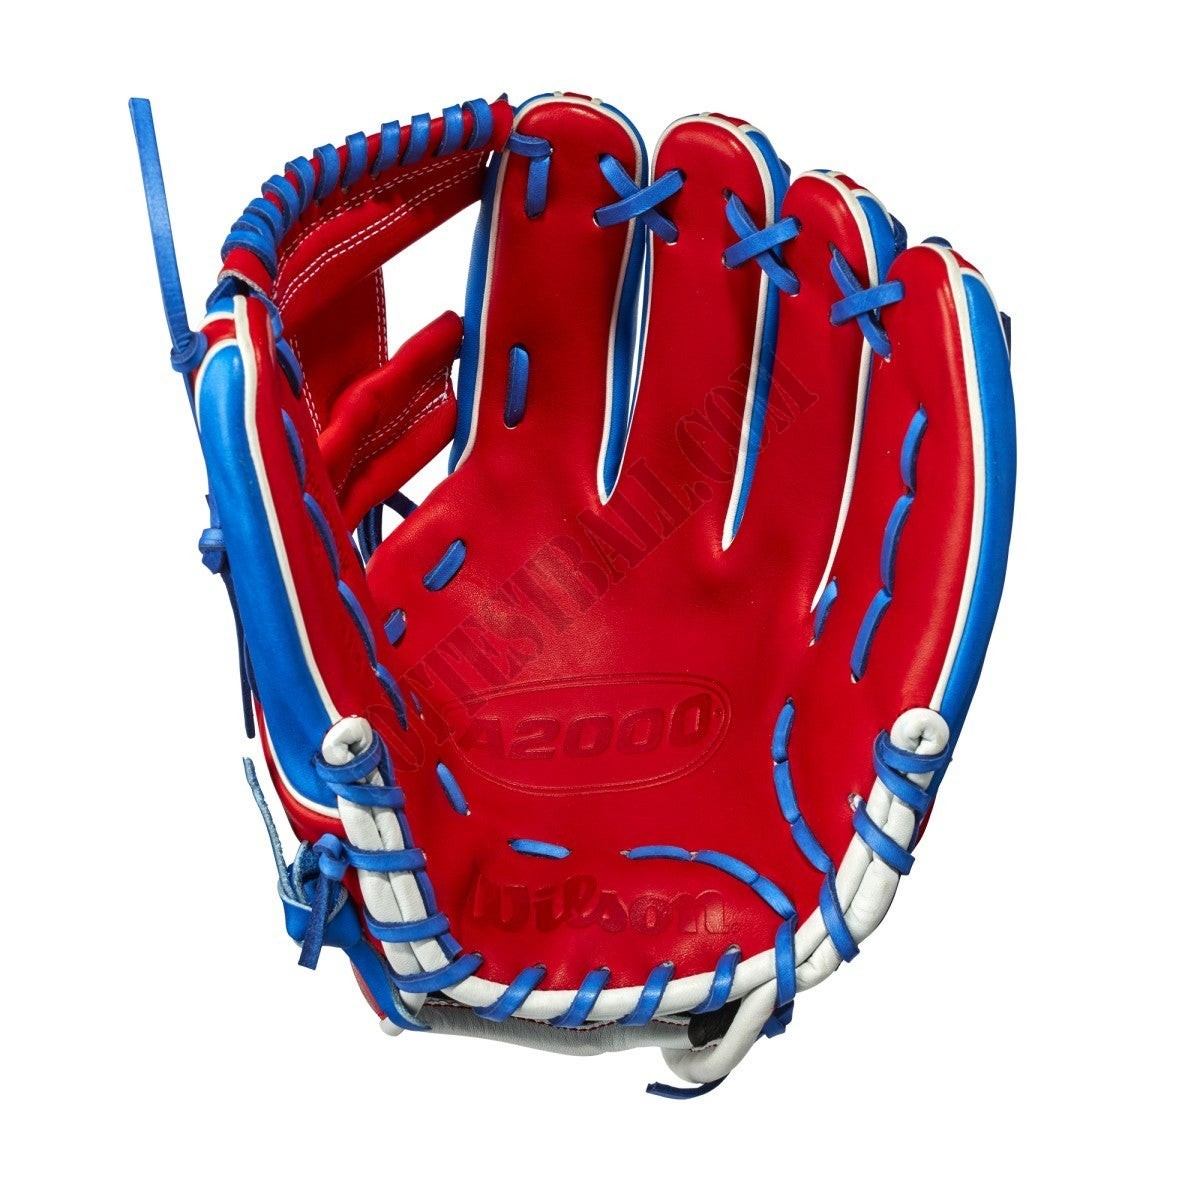 2021 A2000 1786 Puerto Rico 11.5" Infield Baseball Glove - Limited Edition ● Wilson Promotions - -2